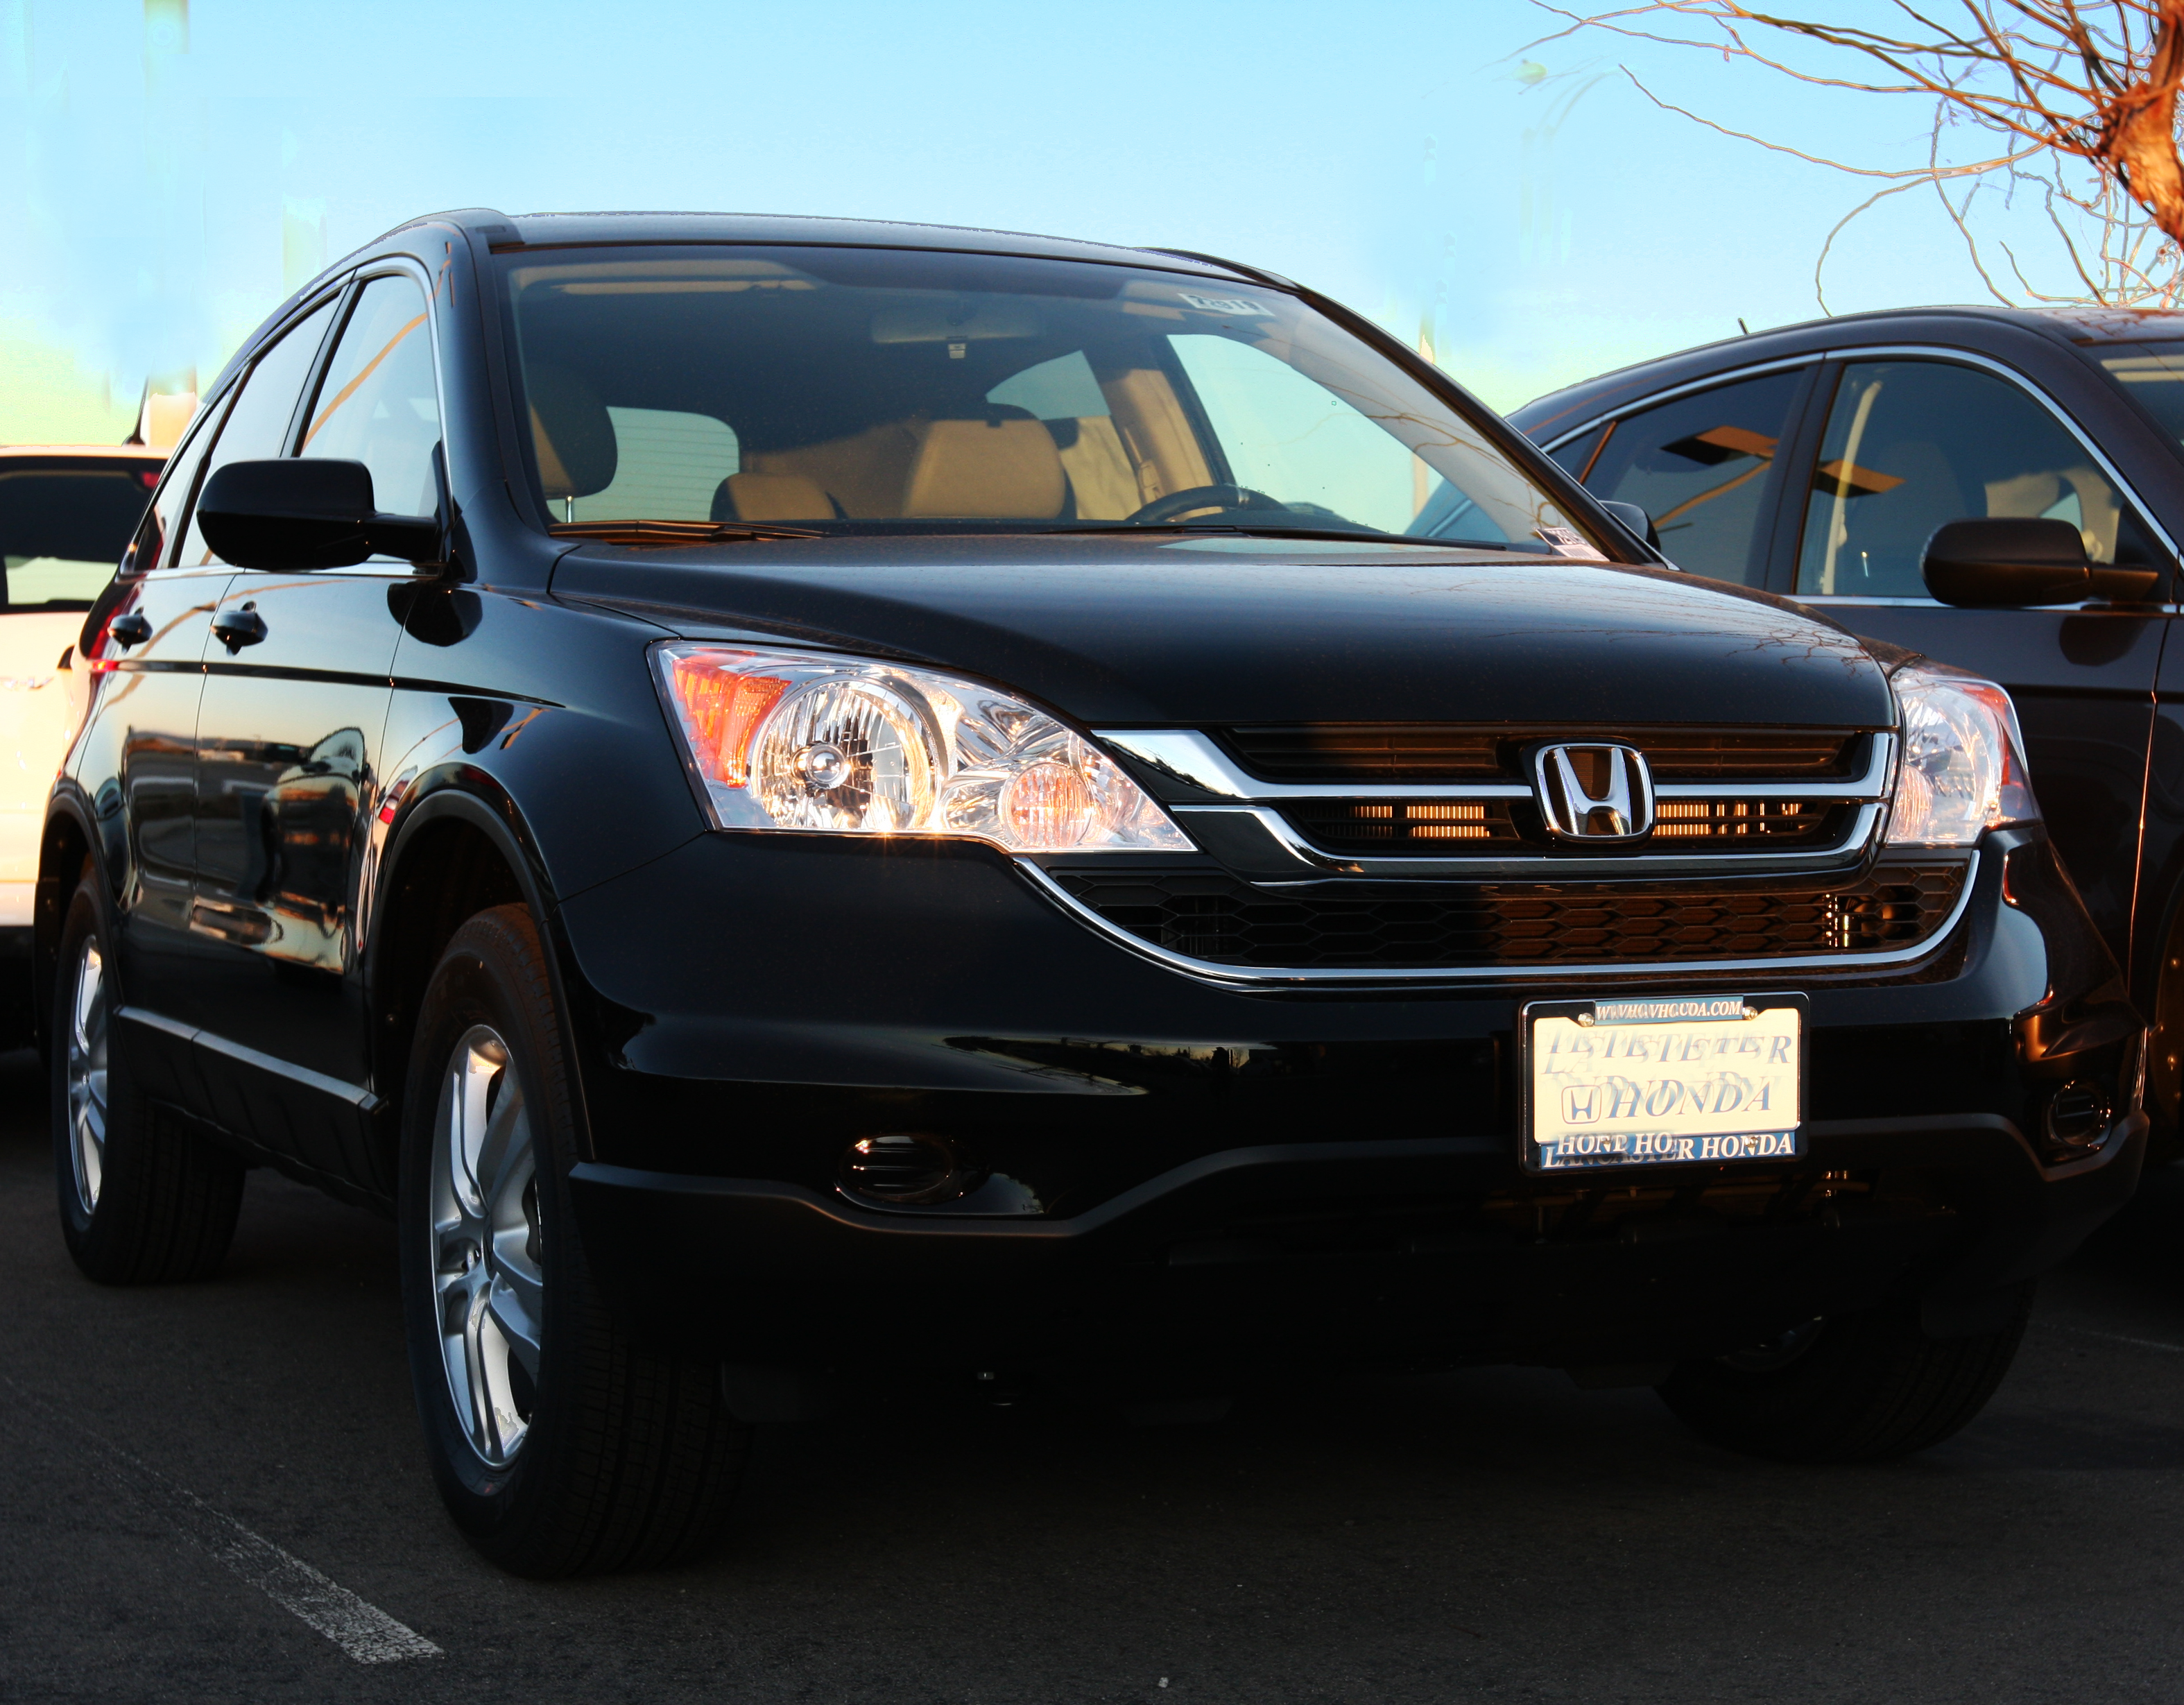 2013 Honda CRV Specifications, Pricing, Pictures and Videos